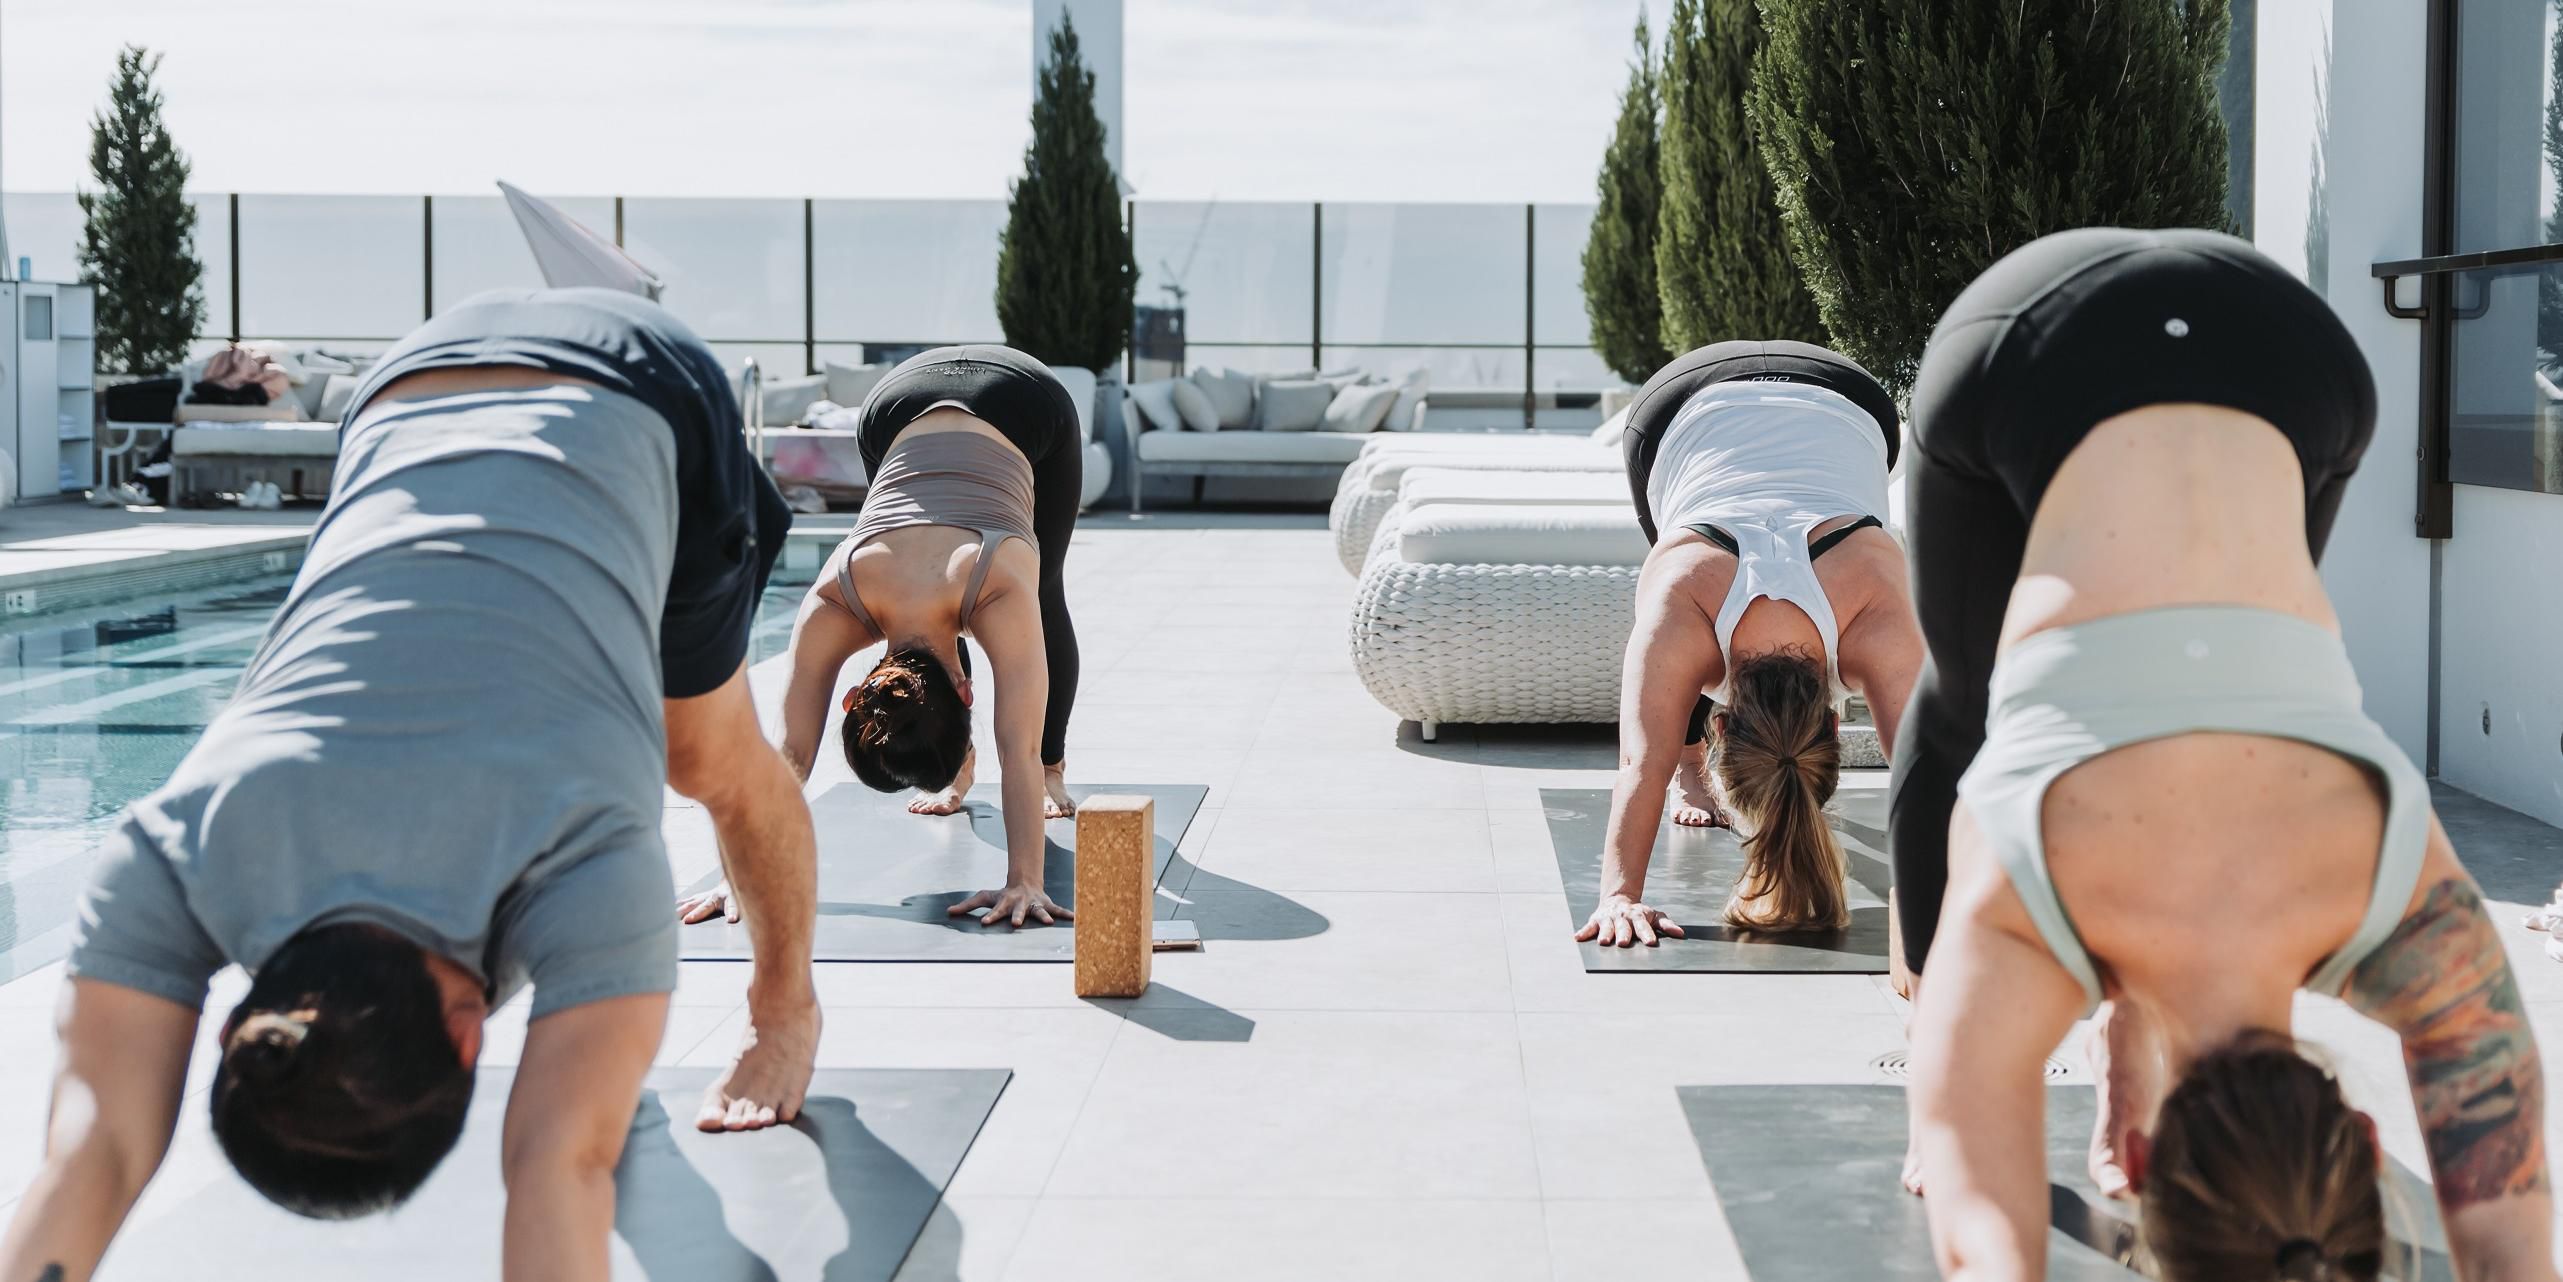 Join us 9am Saturdays for a complimentary yoga flow on the rooftop led by Mana Yoga Retreats. Open to all ages and abilities!